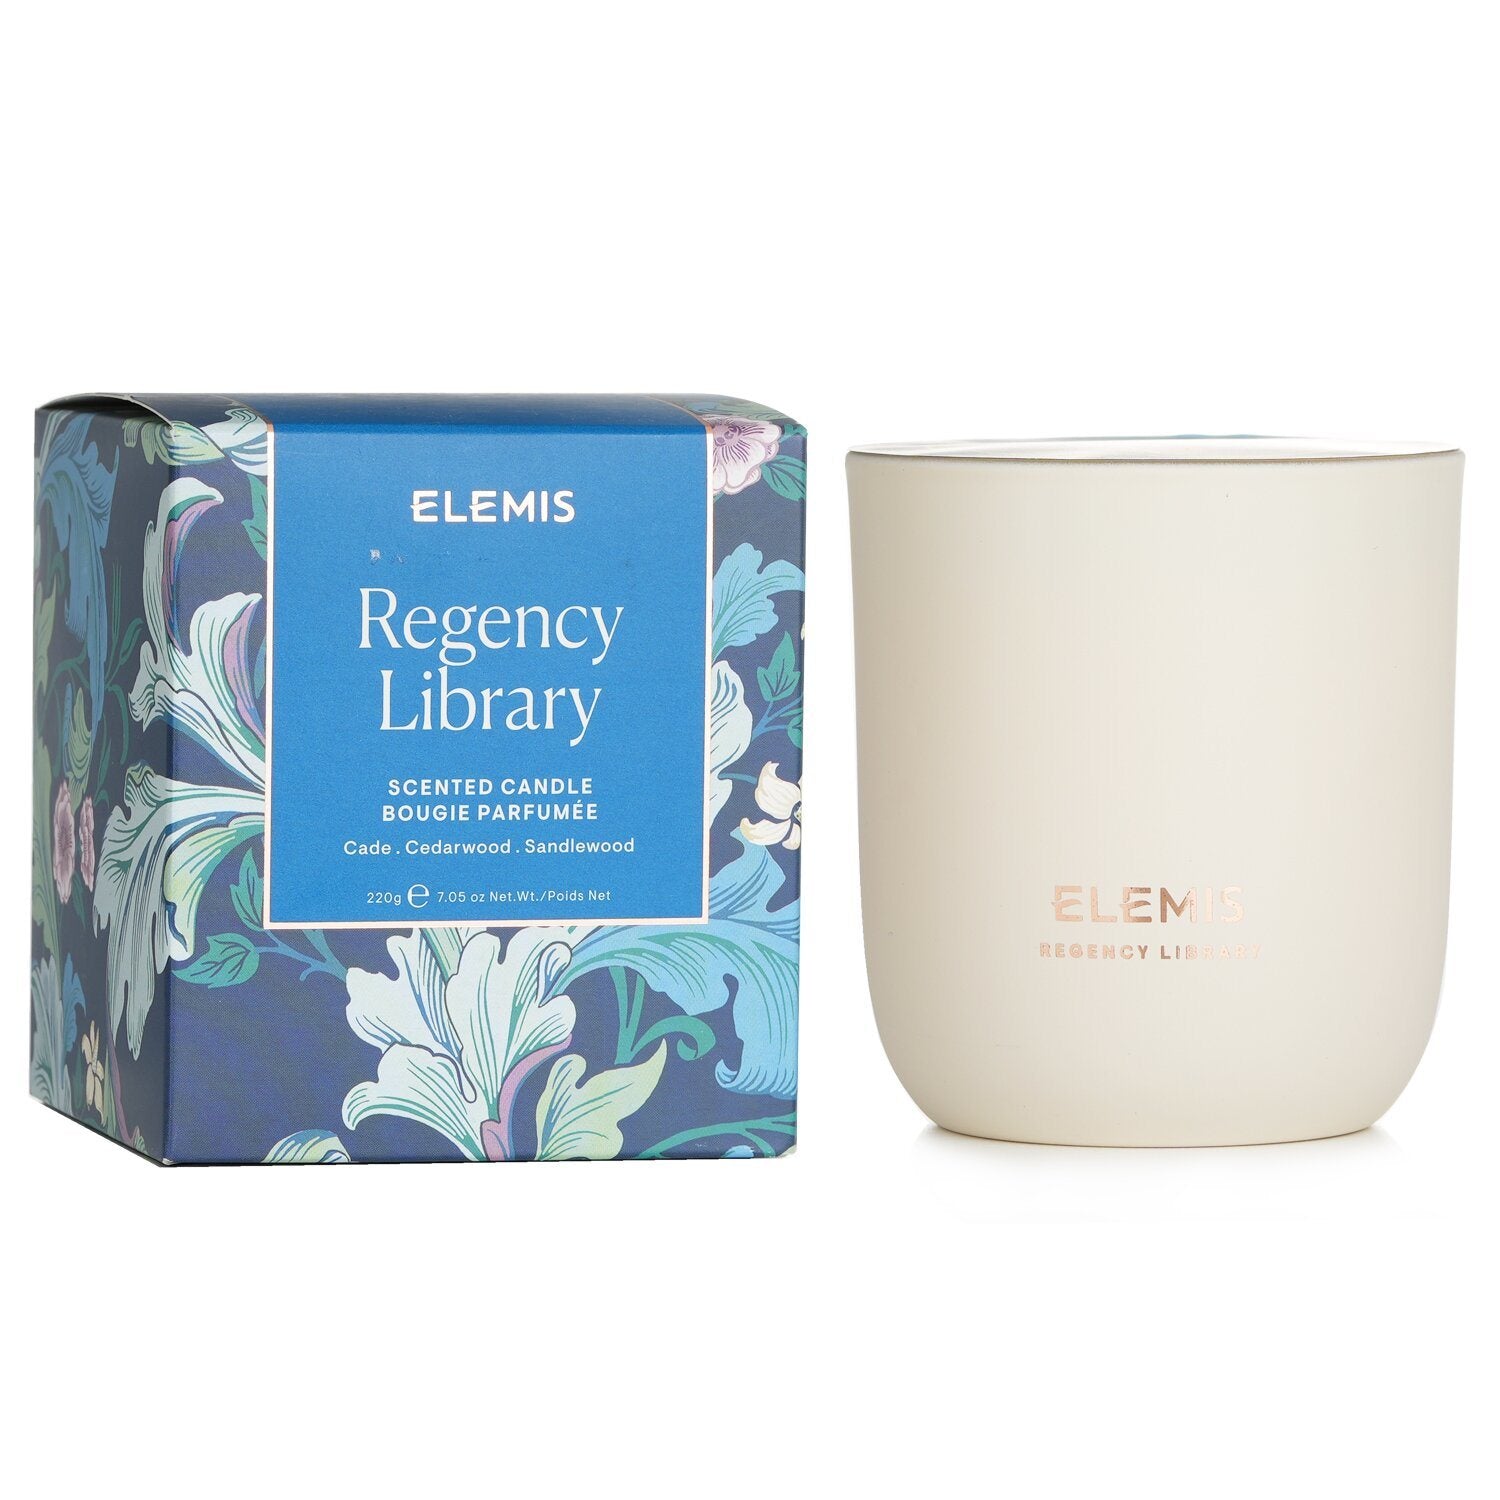 ELEMIS - Scented Candle - Regency Library 888924 220g/7.05oz - lolaluxeshop